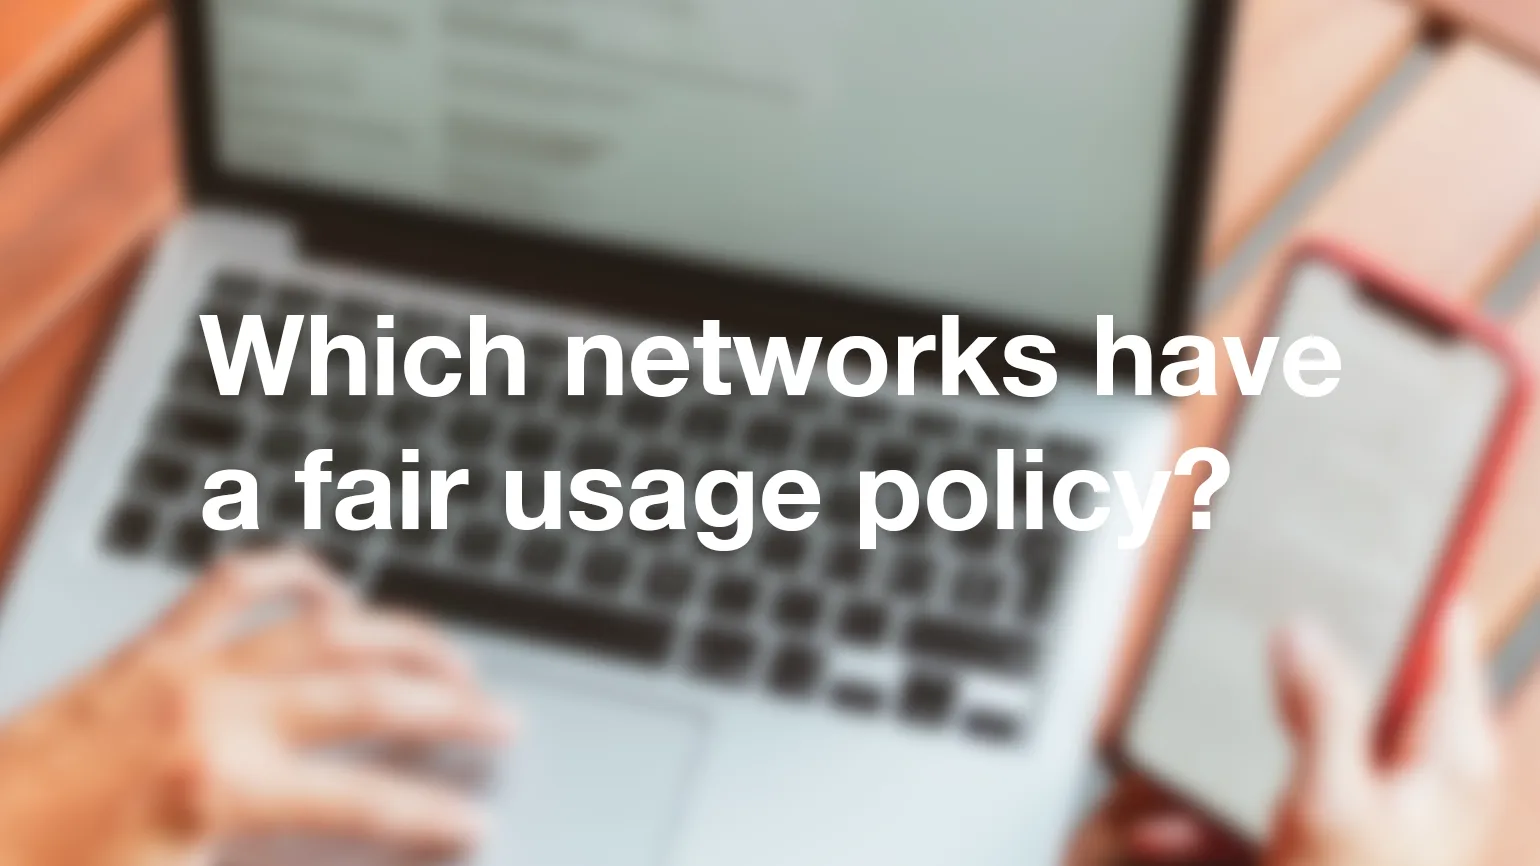 Which networks have a fair usage policy?